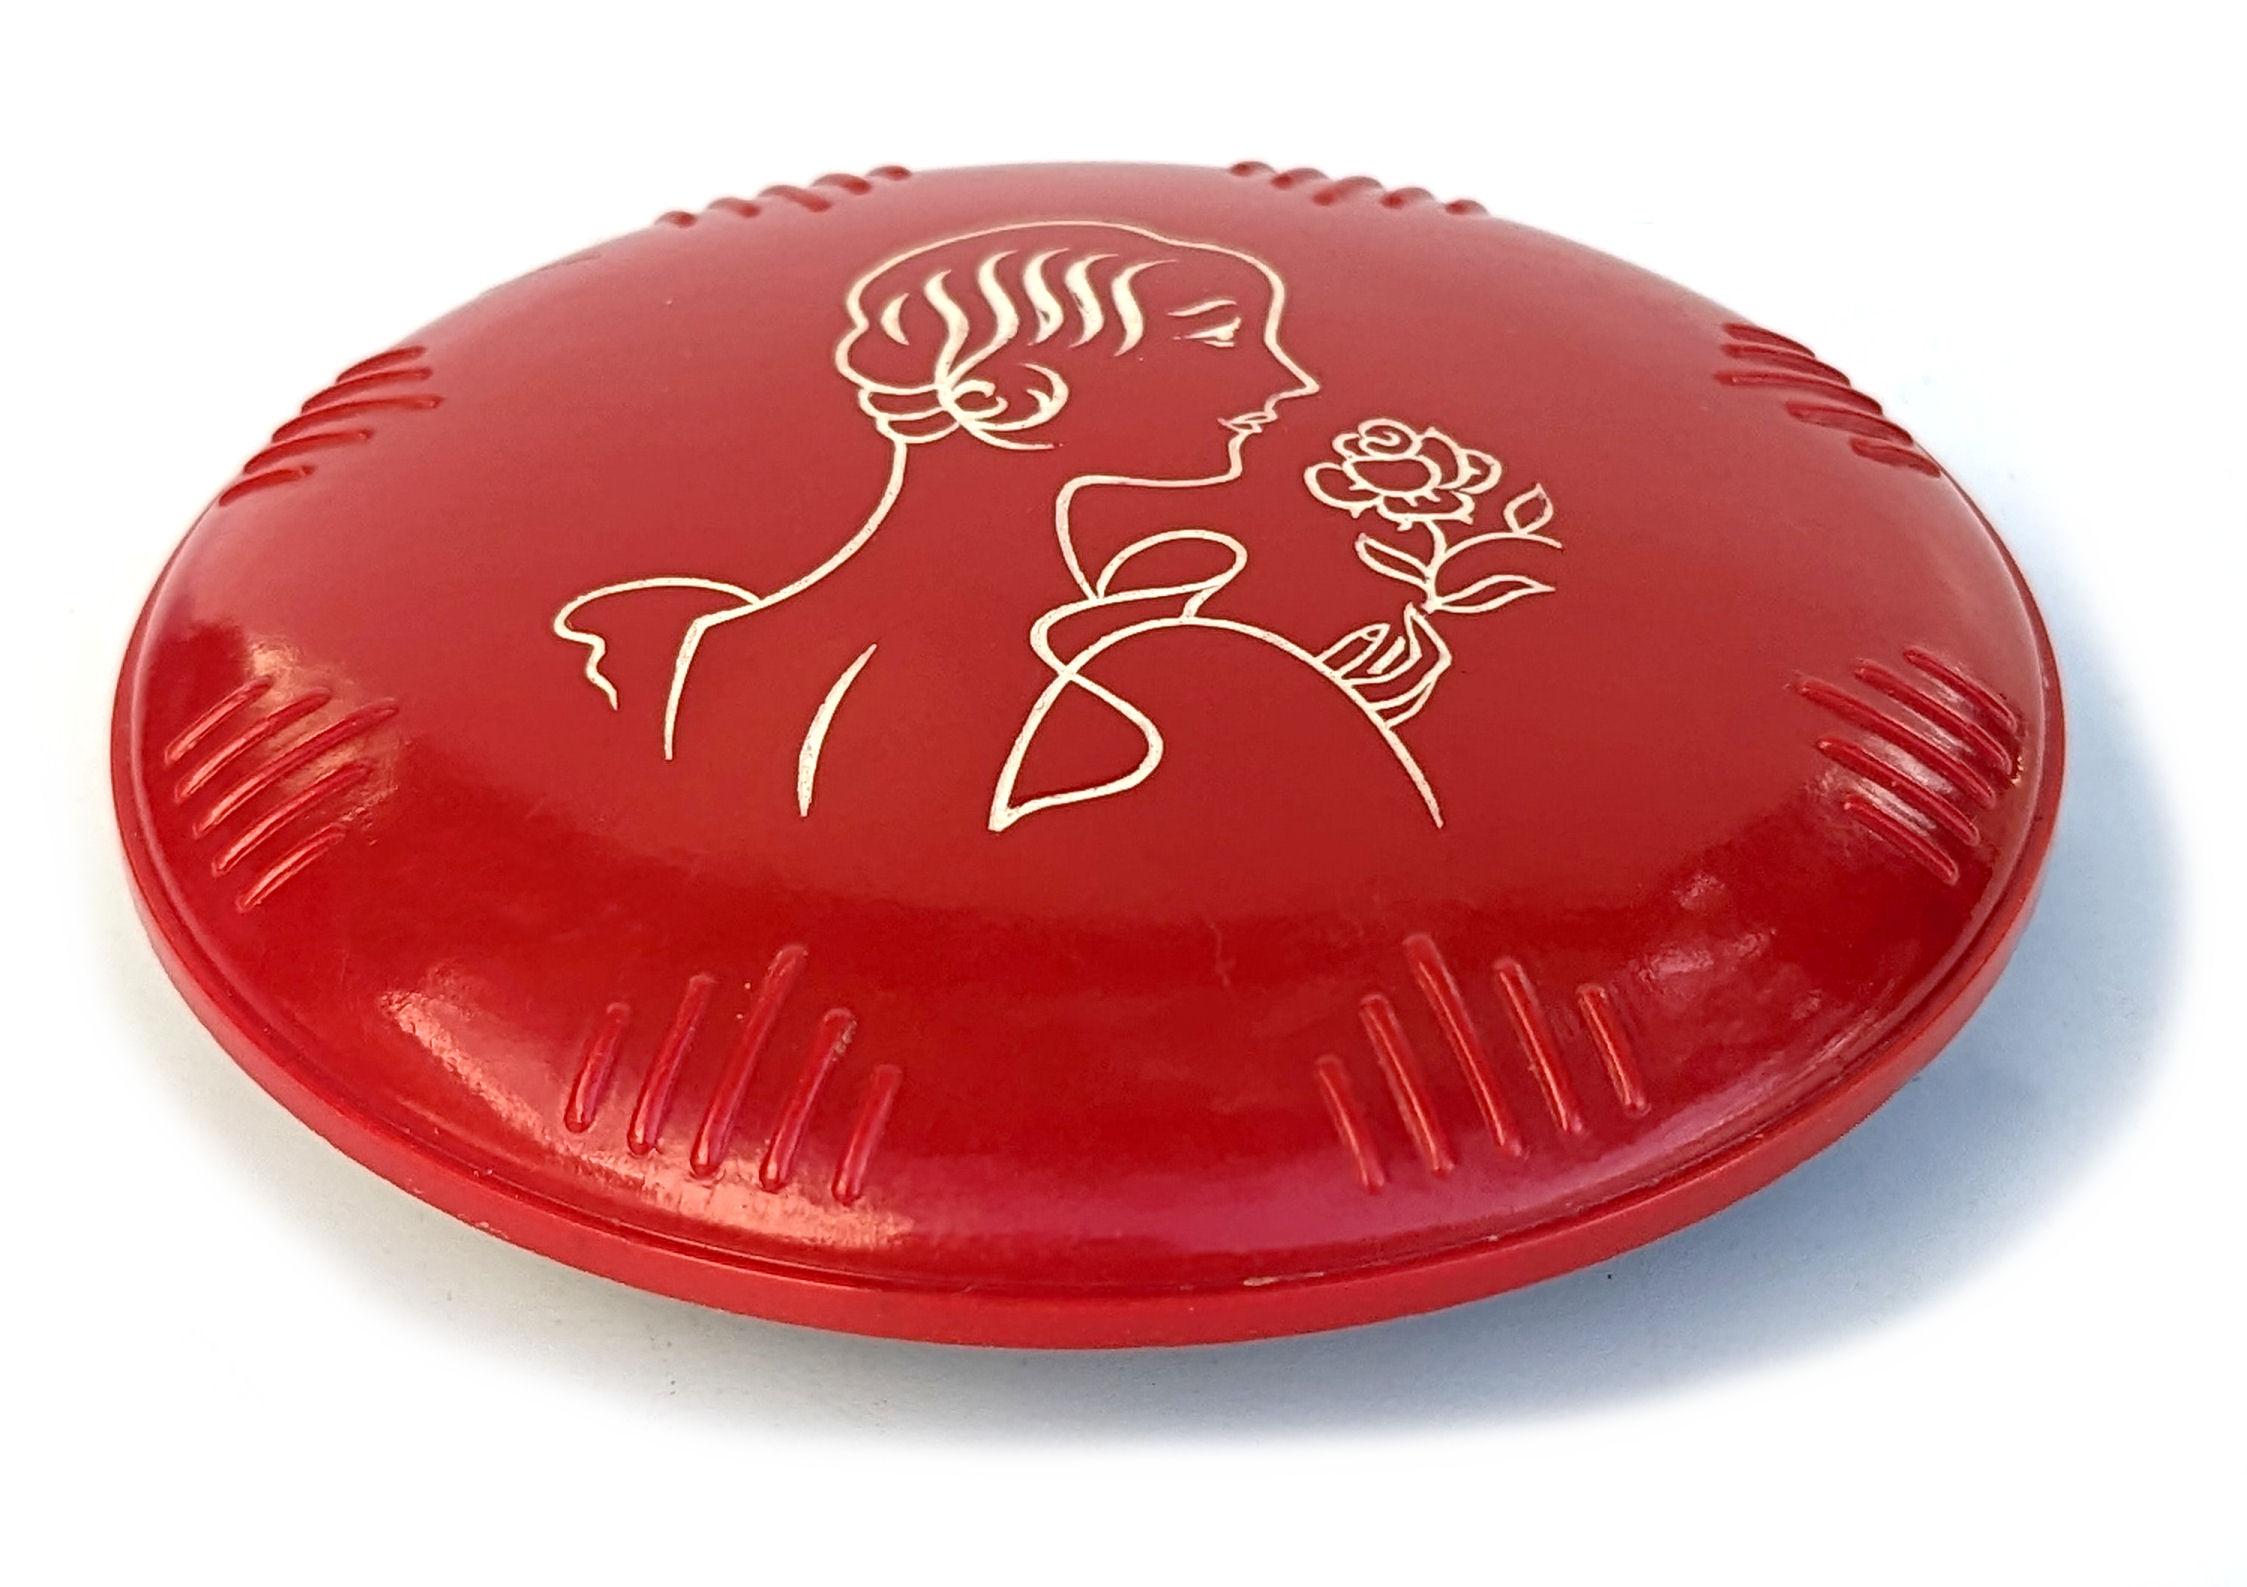 Early celluloid Art Deco ladies compact dating to the 1930's. Depicts a young flapper lady on the lid, the lid is also embossed around the edge. The pot itself screws together with the top. Super colourway of lipstick red and jet black with painted